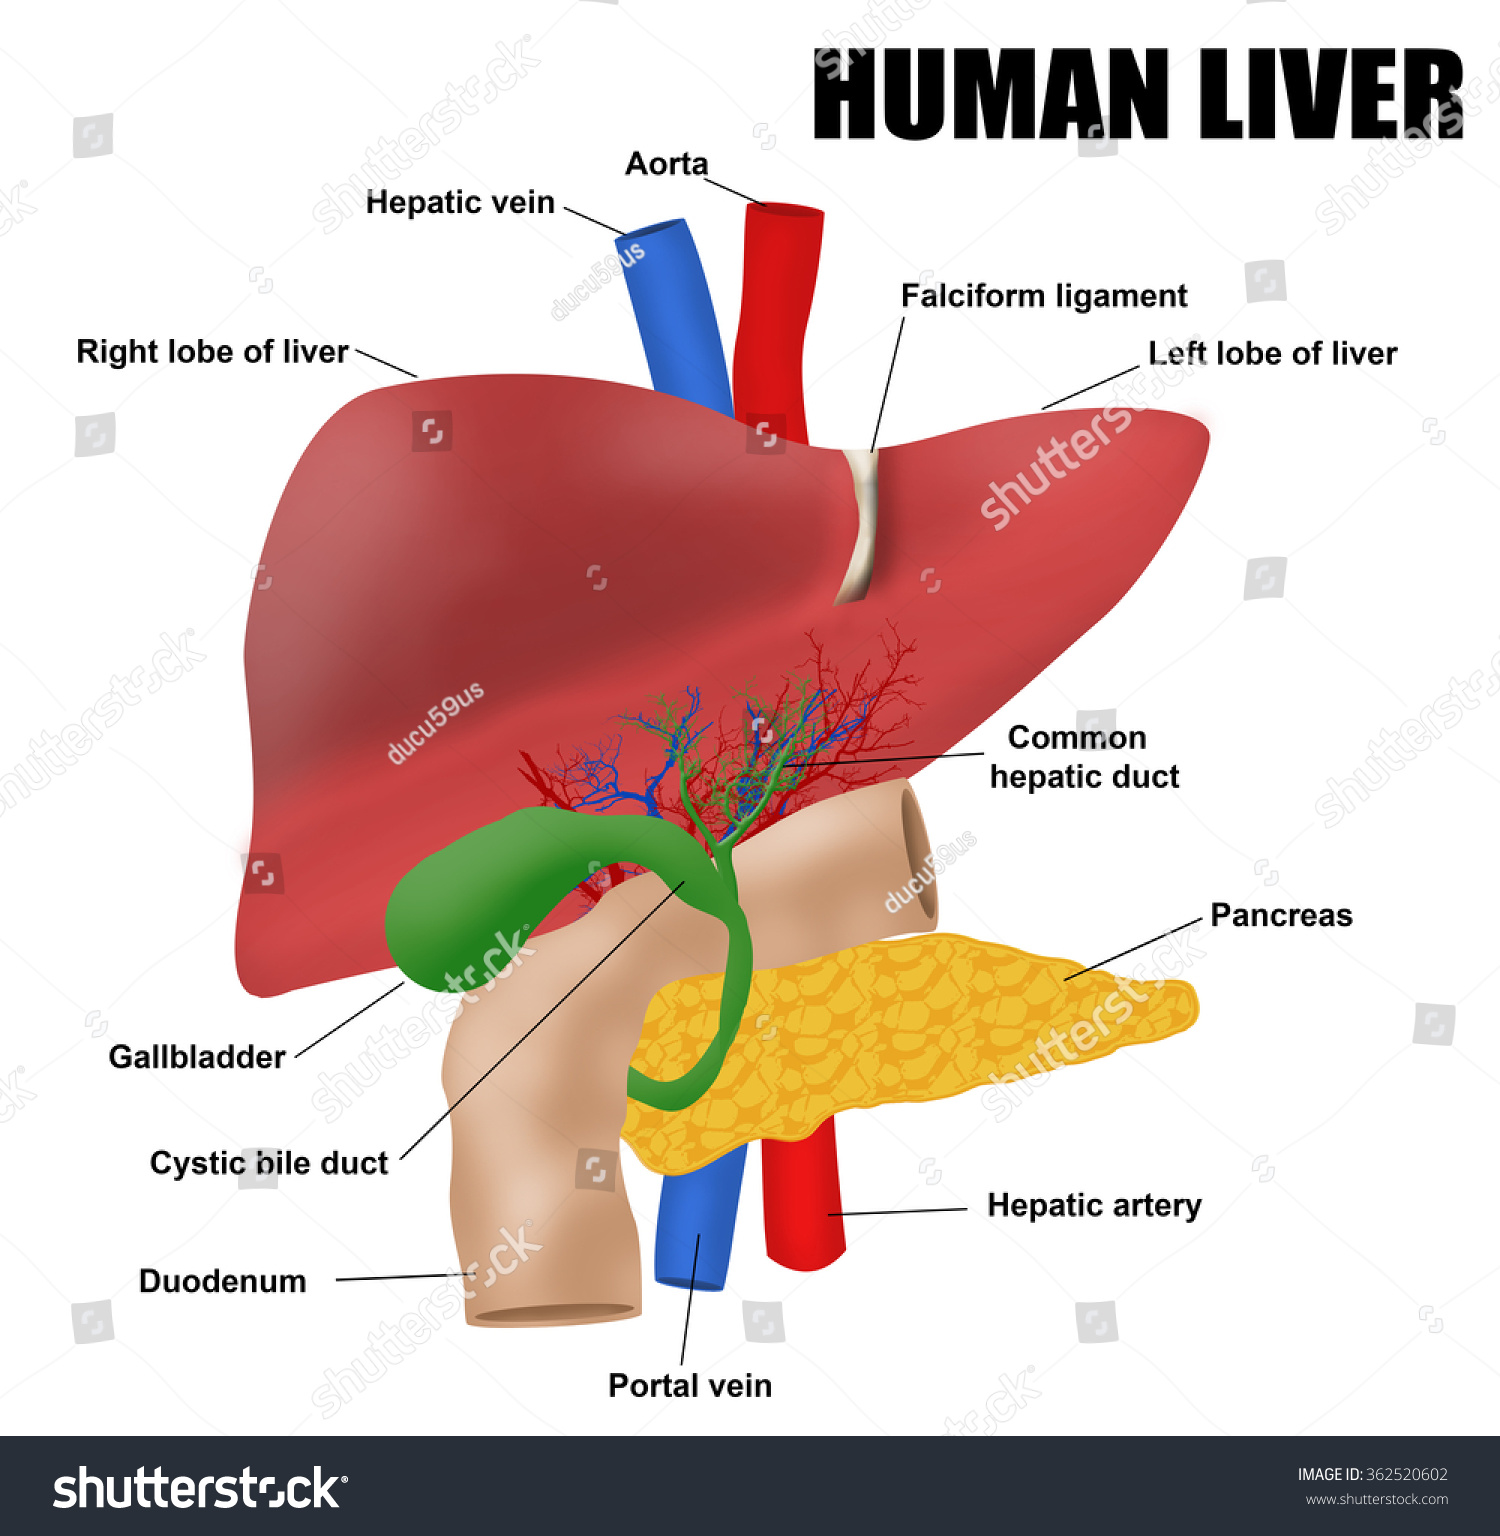 Anatomy Human Liver Vector Illustration For Stock Vector 362520602